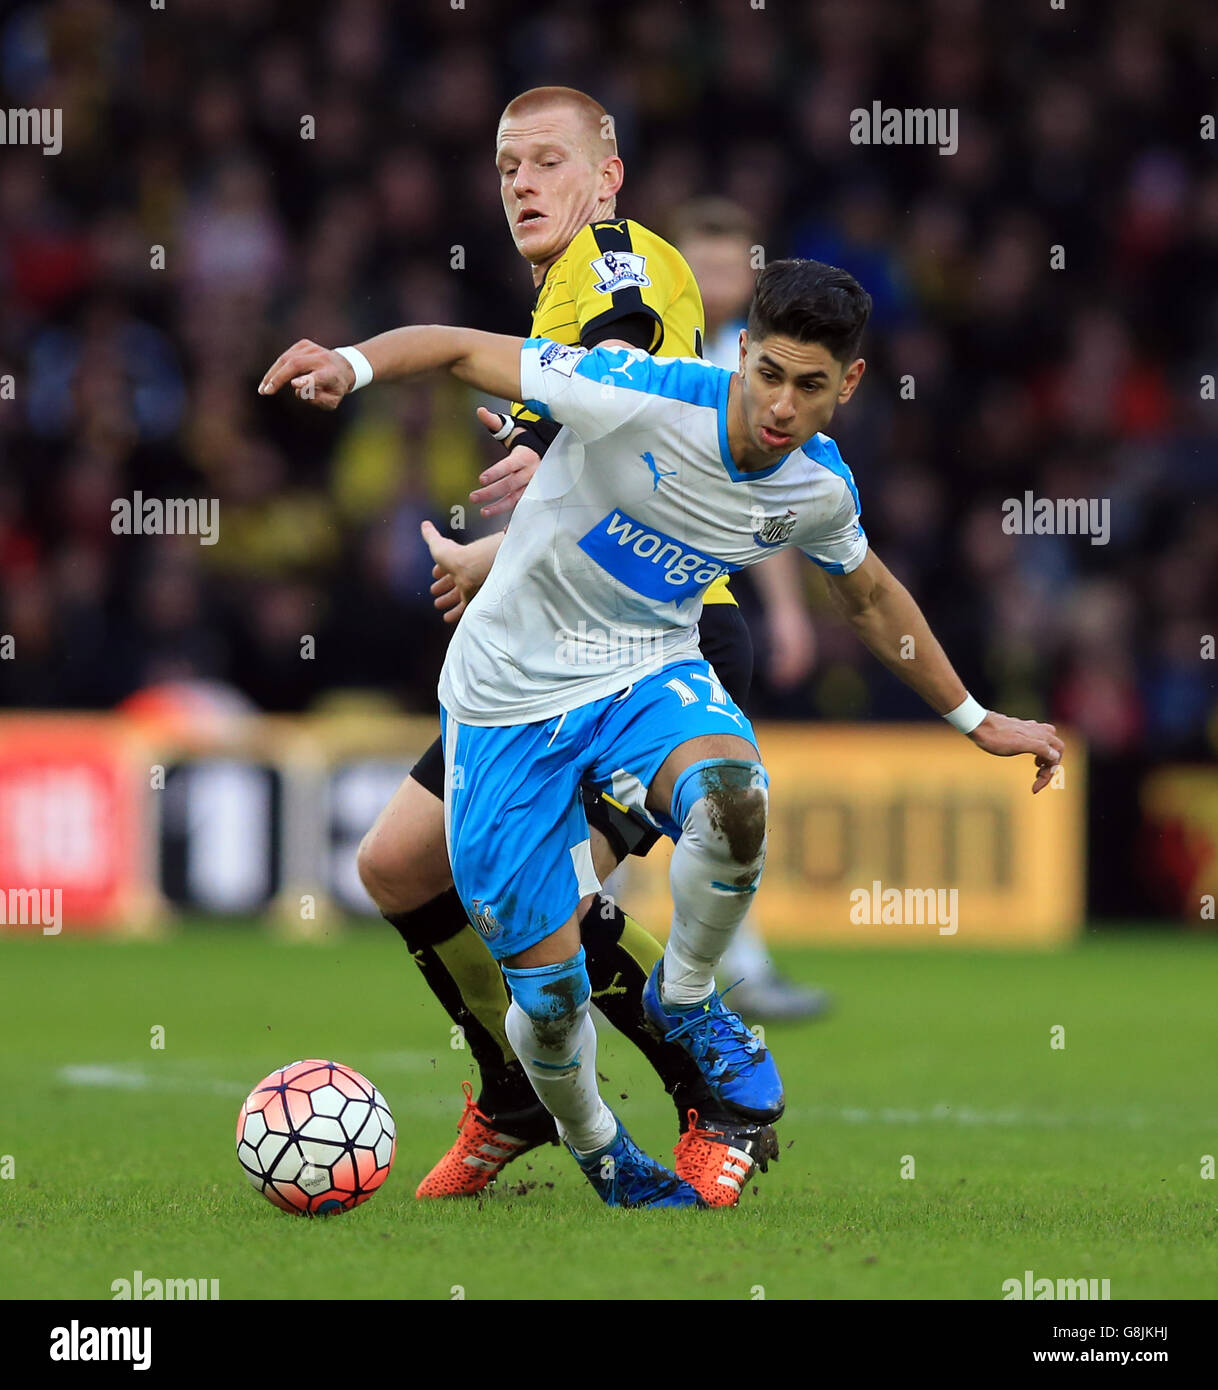 Watford's Ben Watson and Newcastle United's Ayoze Perez battle for the ball during the Emirates FA Cup, third round game at Vicarage Road, Watford. Stock Photo